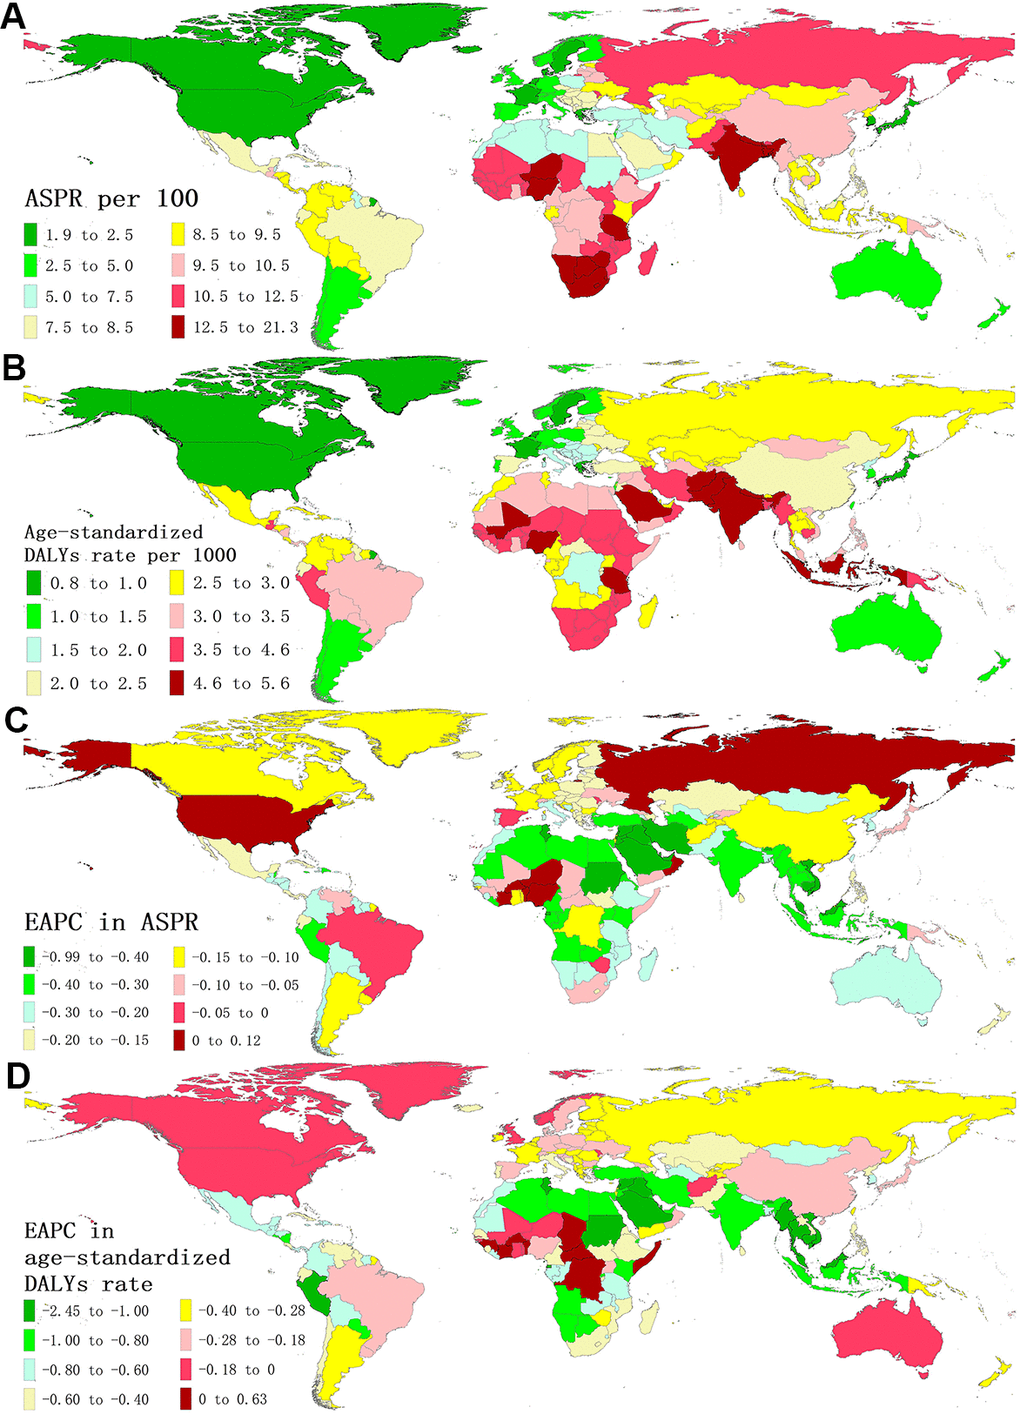 The global disease burden of BVL for both sexes in 204 countries and territories. (A) The ASPR of BVL in 2019; (B) The age-standardized DALYs rate of BVL in 2019; (C) The EAPC in ASPR of BVL from 1990 to 2019. (D) The EAPC in age-standardized DALYs rate of BVL from 1990 to 2019. BVL, blindness and vision loss; ASPR, age-standardized prevalence rate; DALYs, disability-adjusted life years; EAPC, estimated annual percentage change.